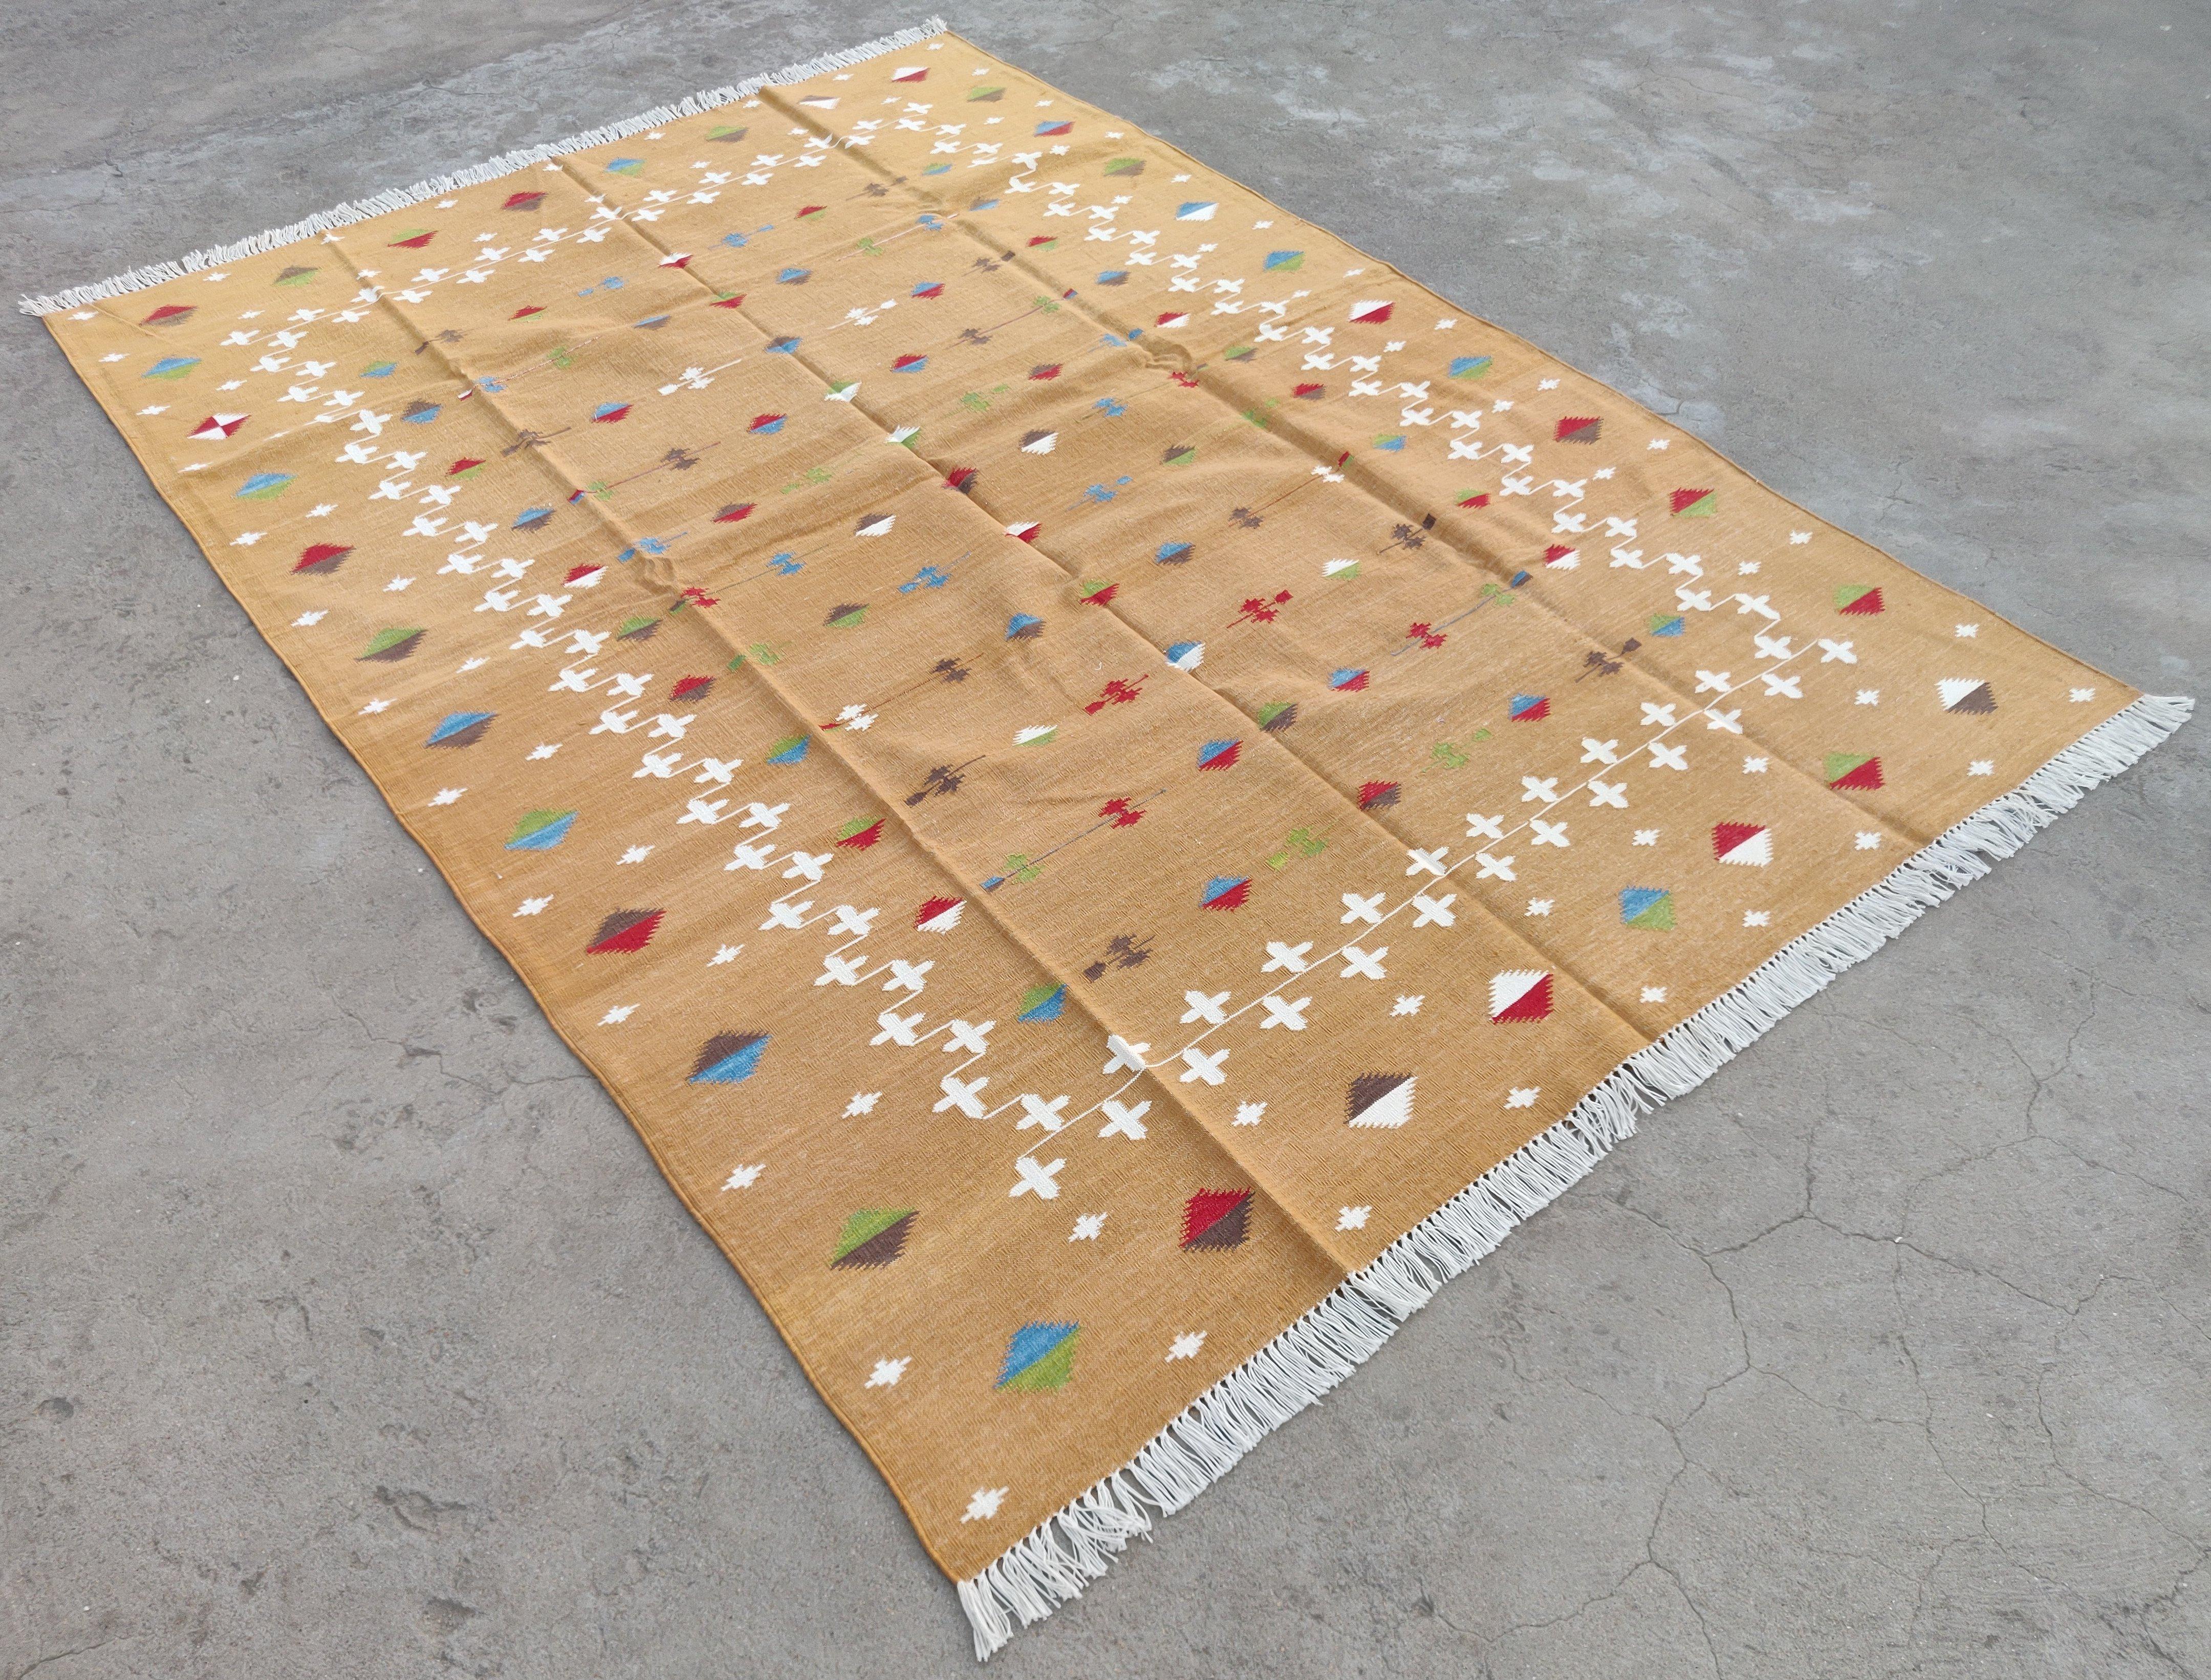 Cotton Vegetable Dyed Reversible Mustard And White Indian Shooting Star Rug - 6'x9'
These special flat-weave dhurries are hand-woven with 15 ply 100% cotton yarn. Due to the special manufacturing techniques used to create our rugs, the size and